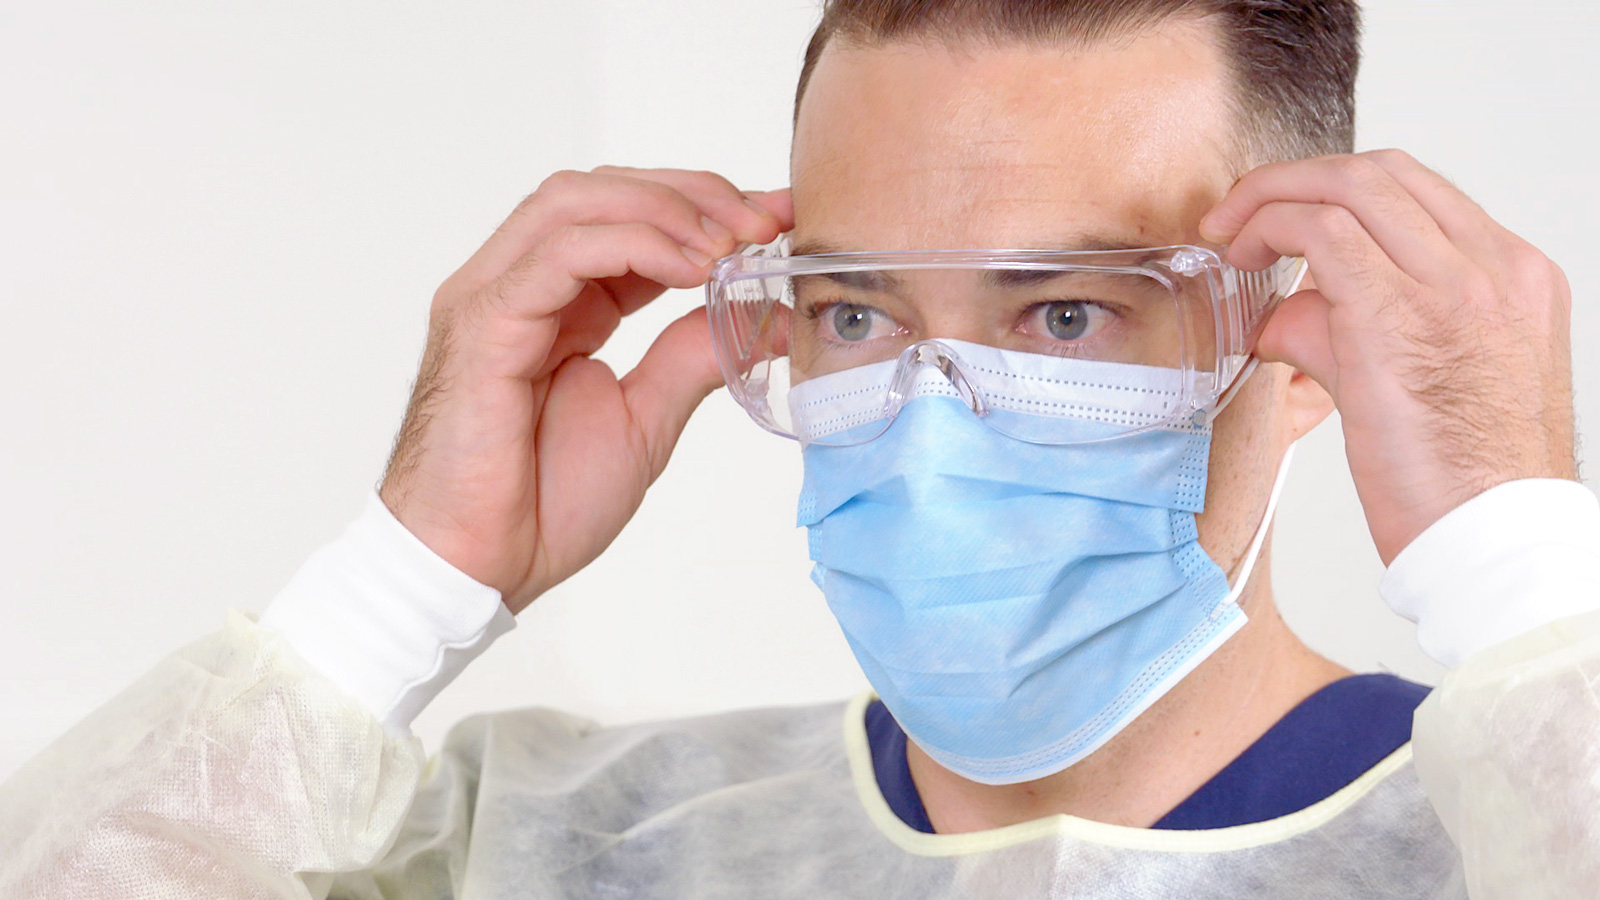 A man in personal protective equipment adjusts his safety glasses